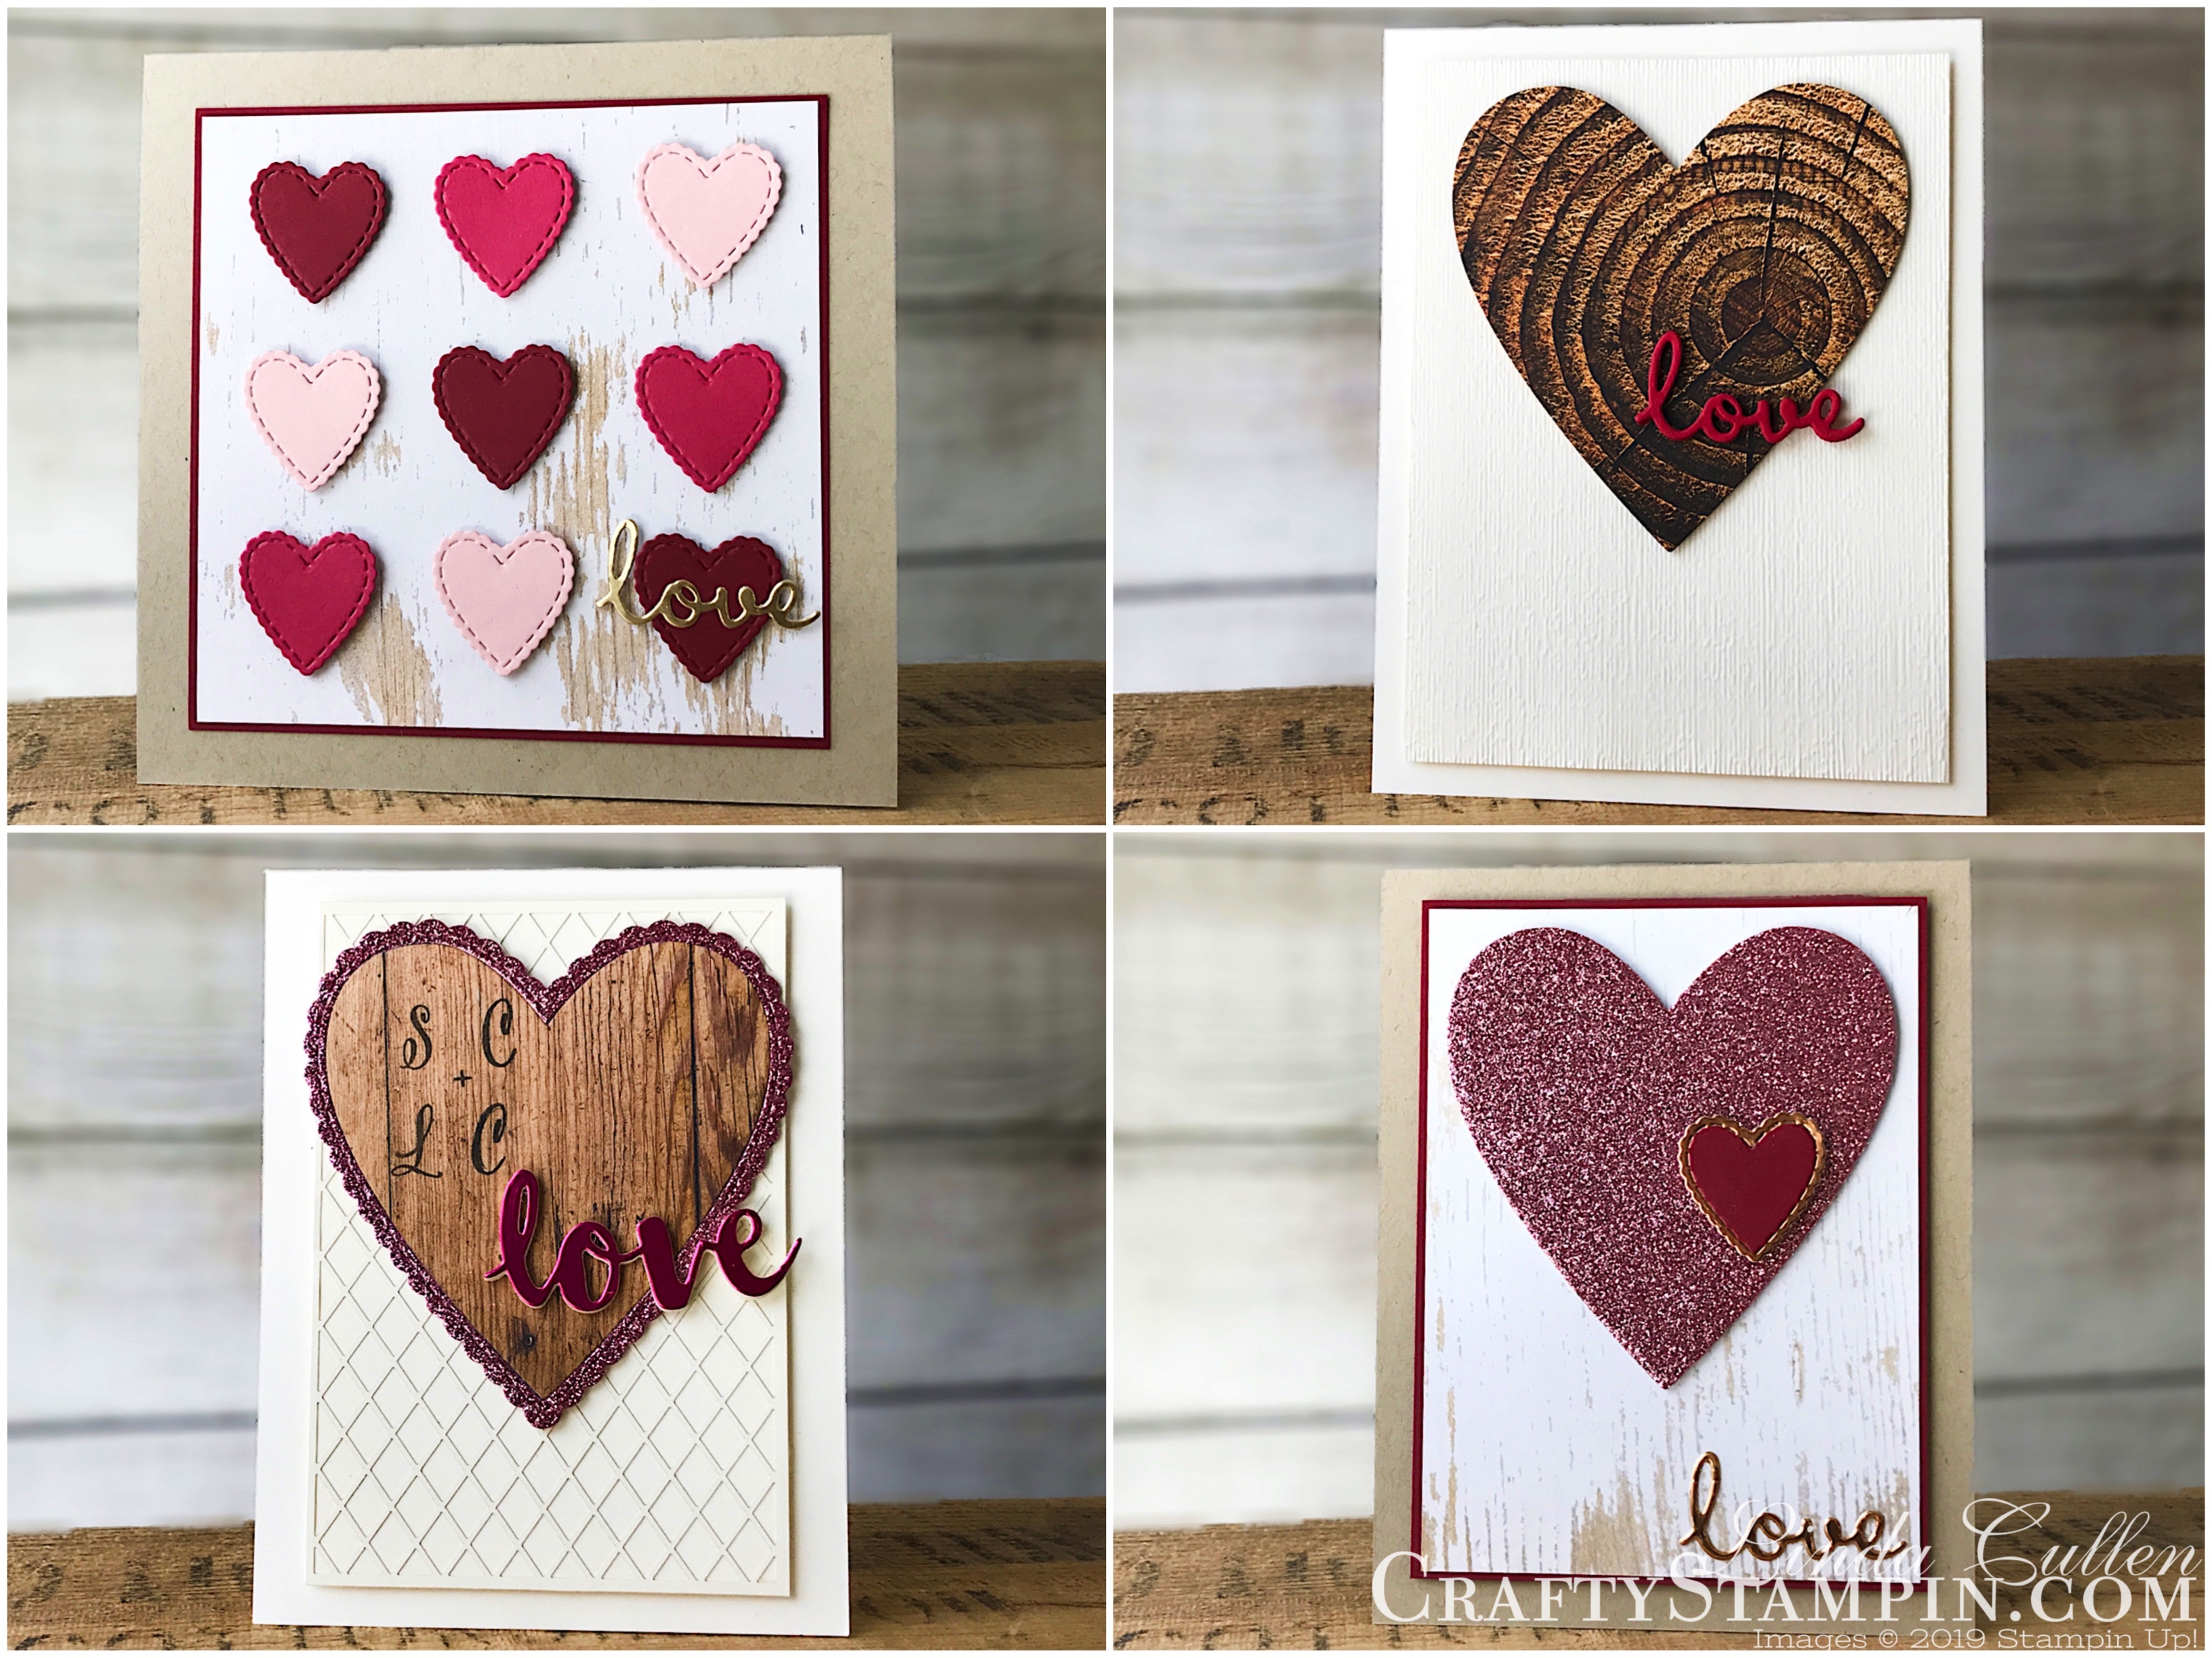 Something From the Heart - Designer Papers Blog